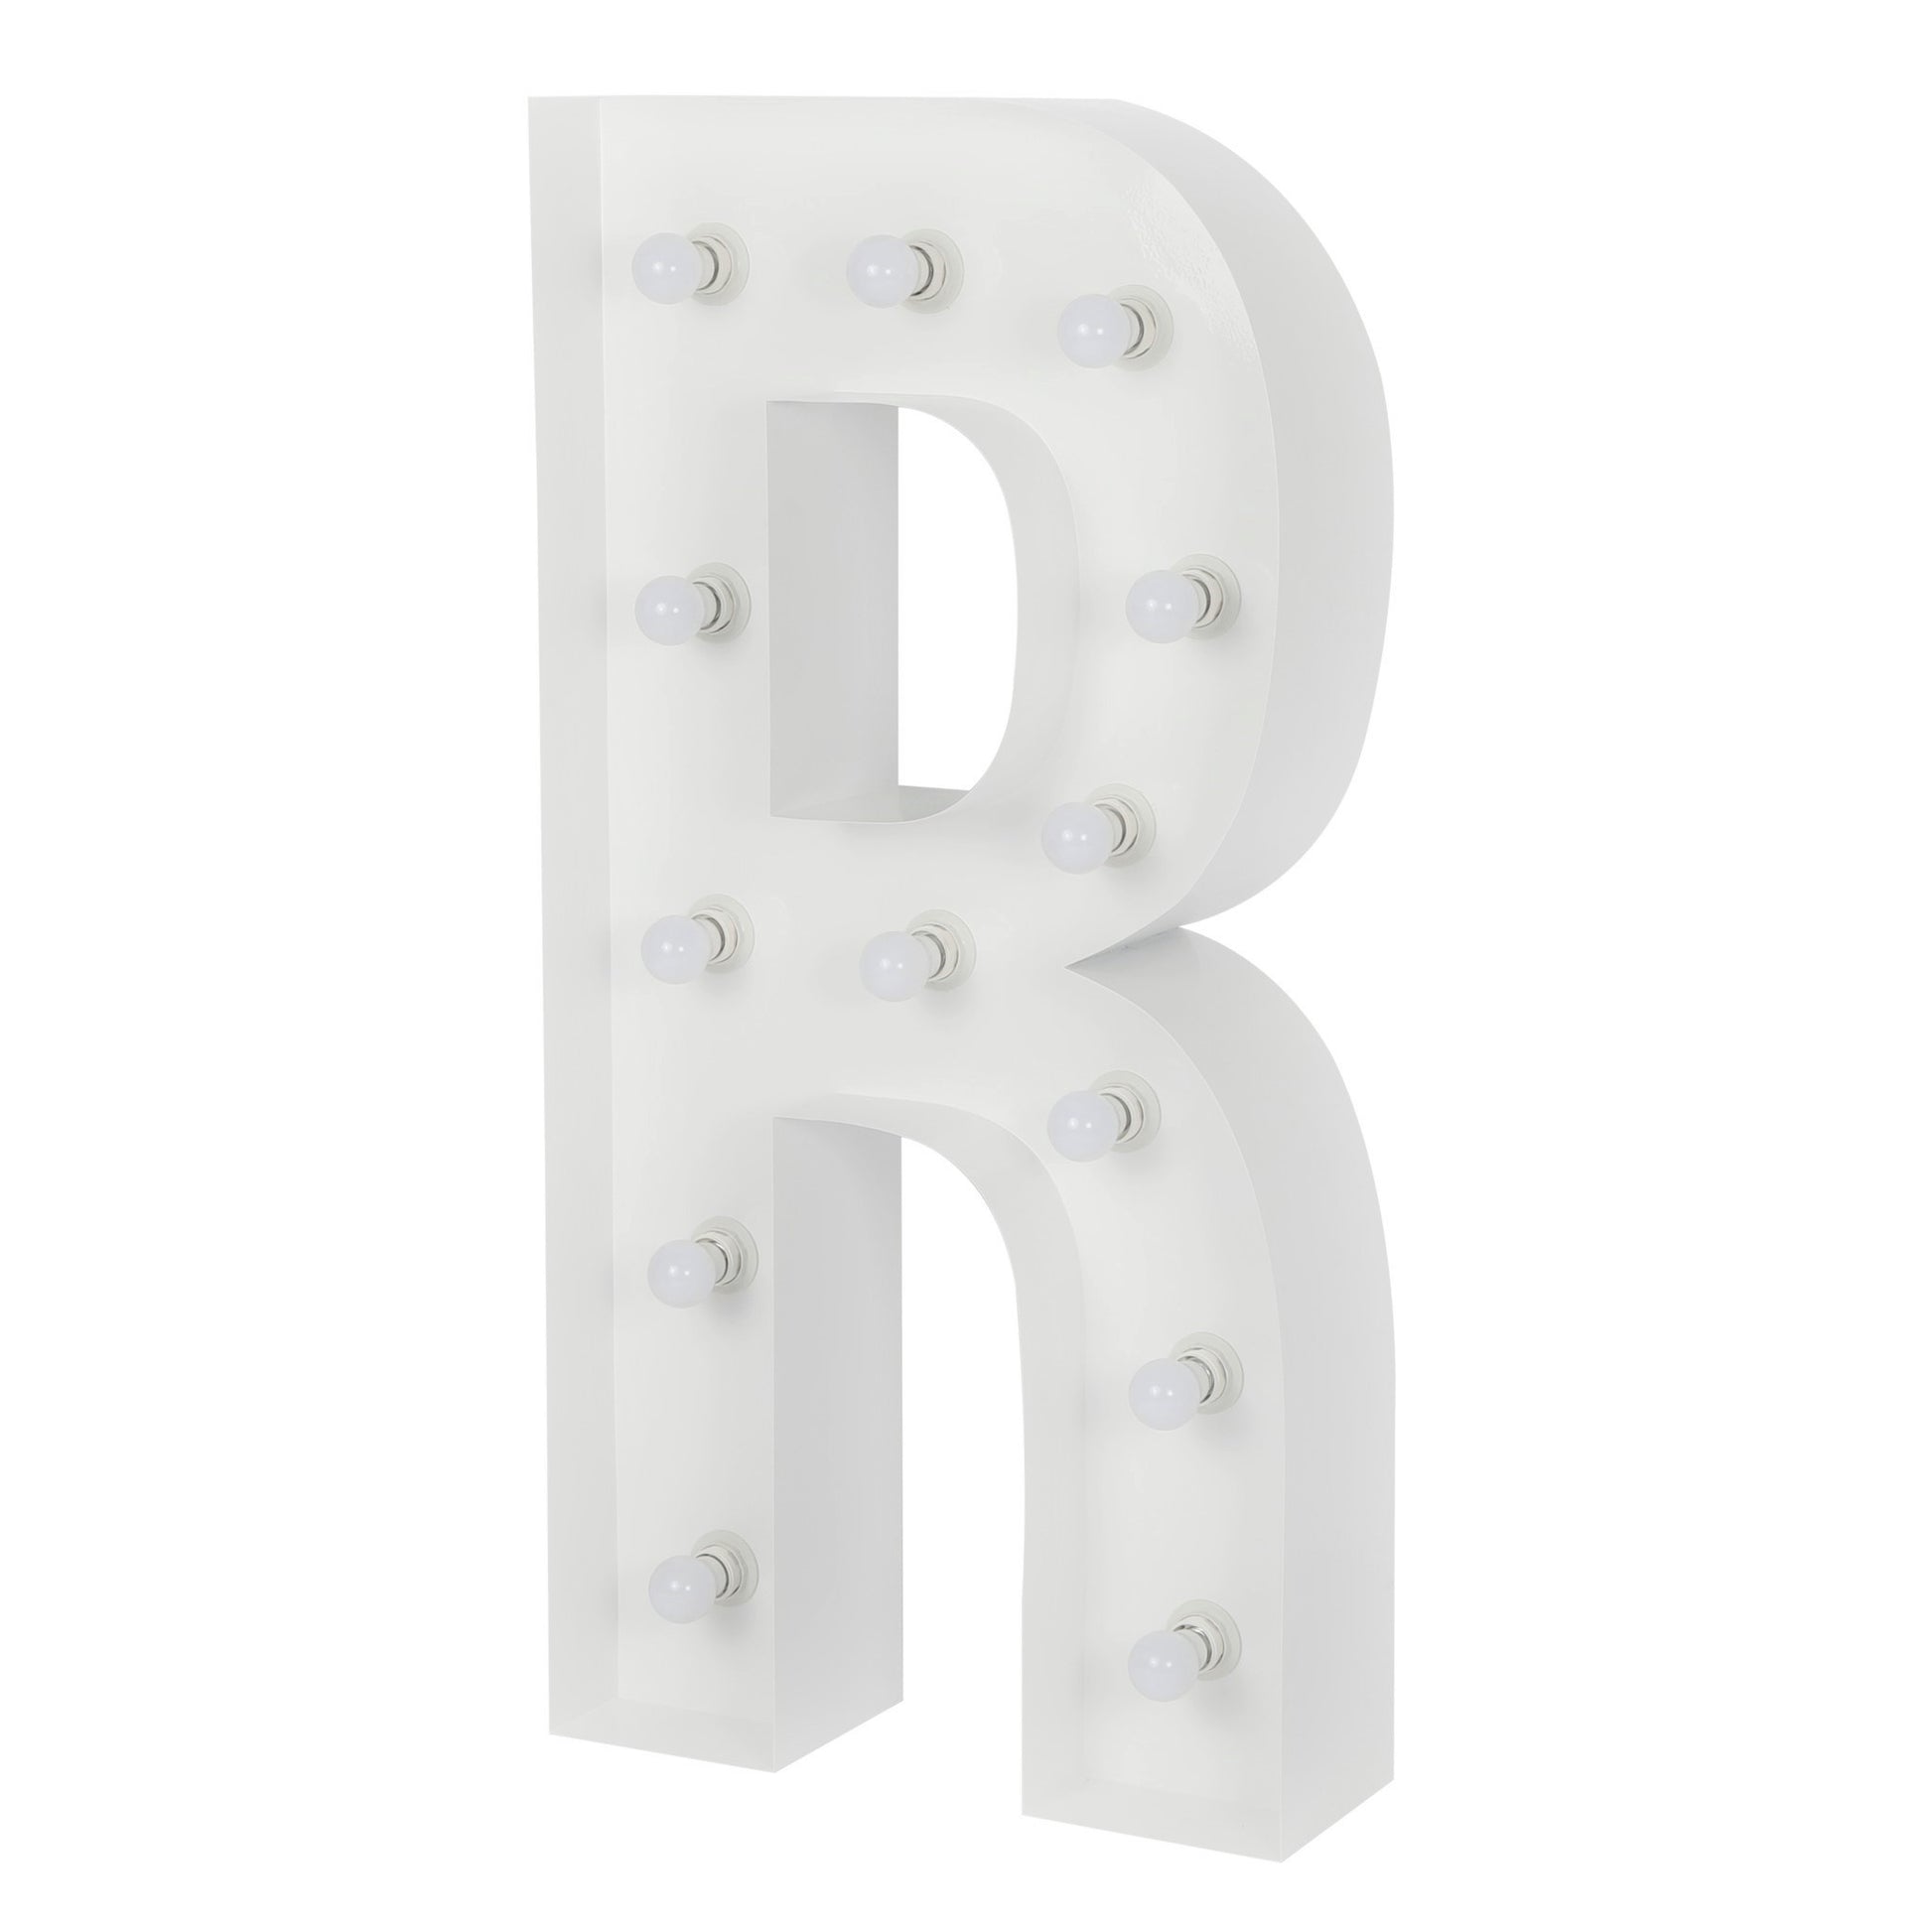 Large 4ft Tall LED MARQUEE Number - 1